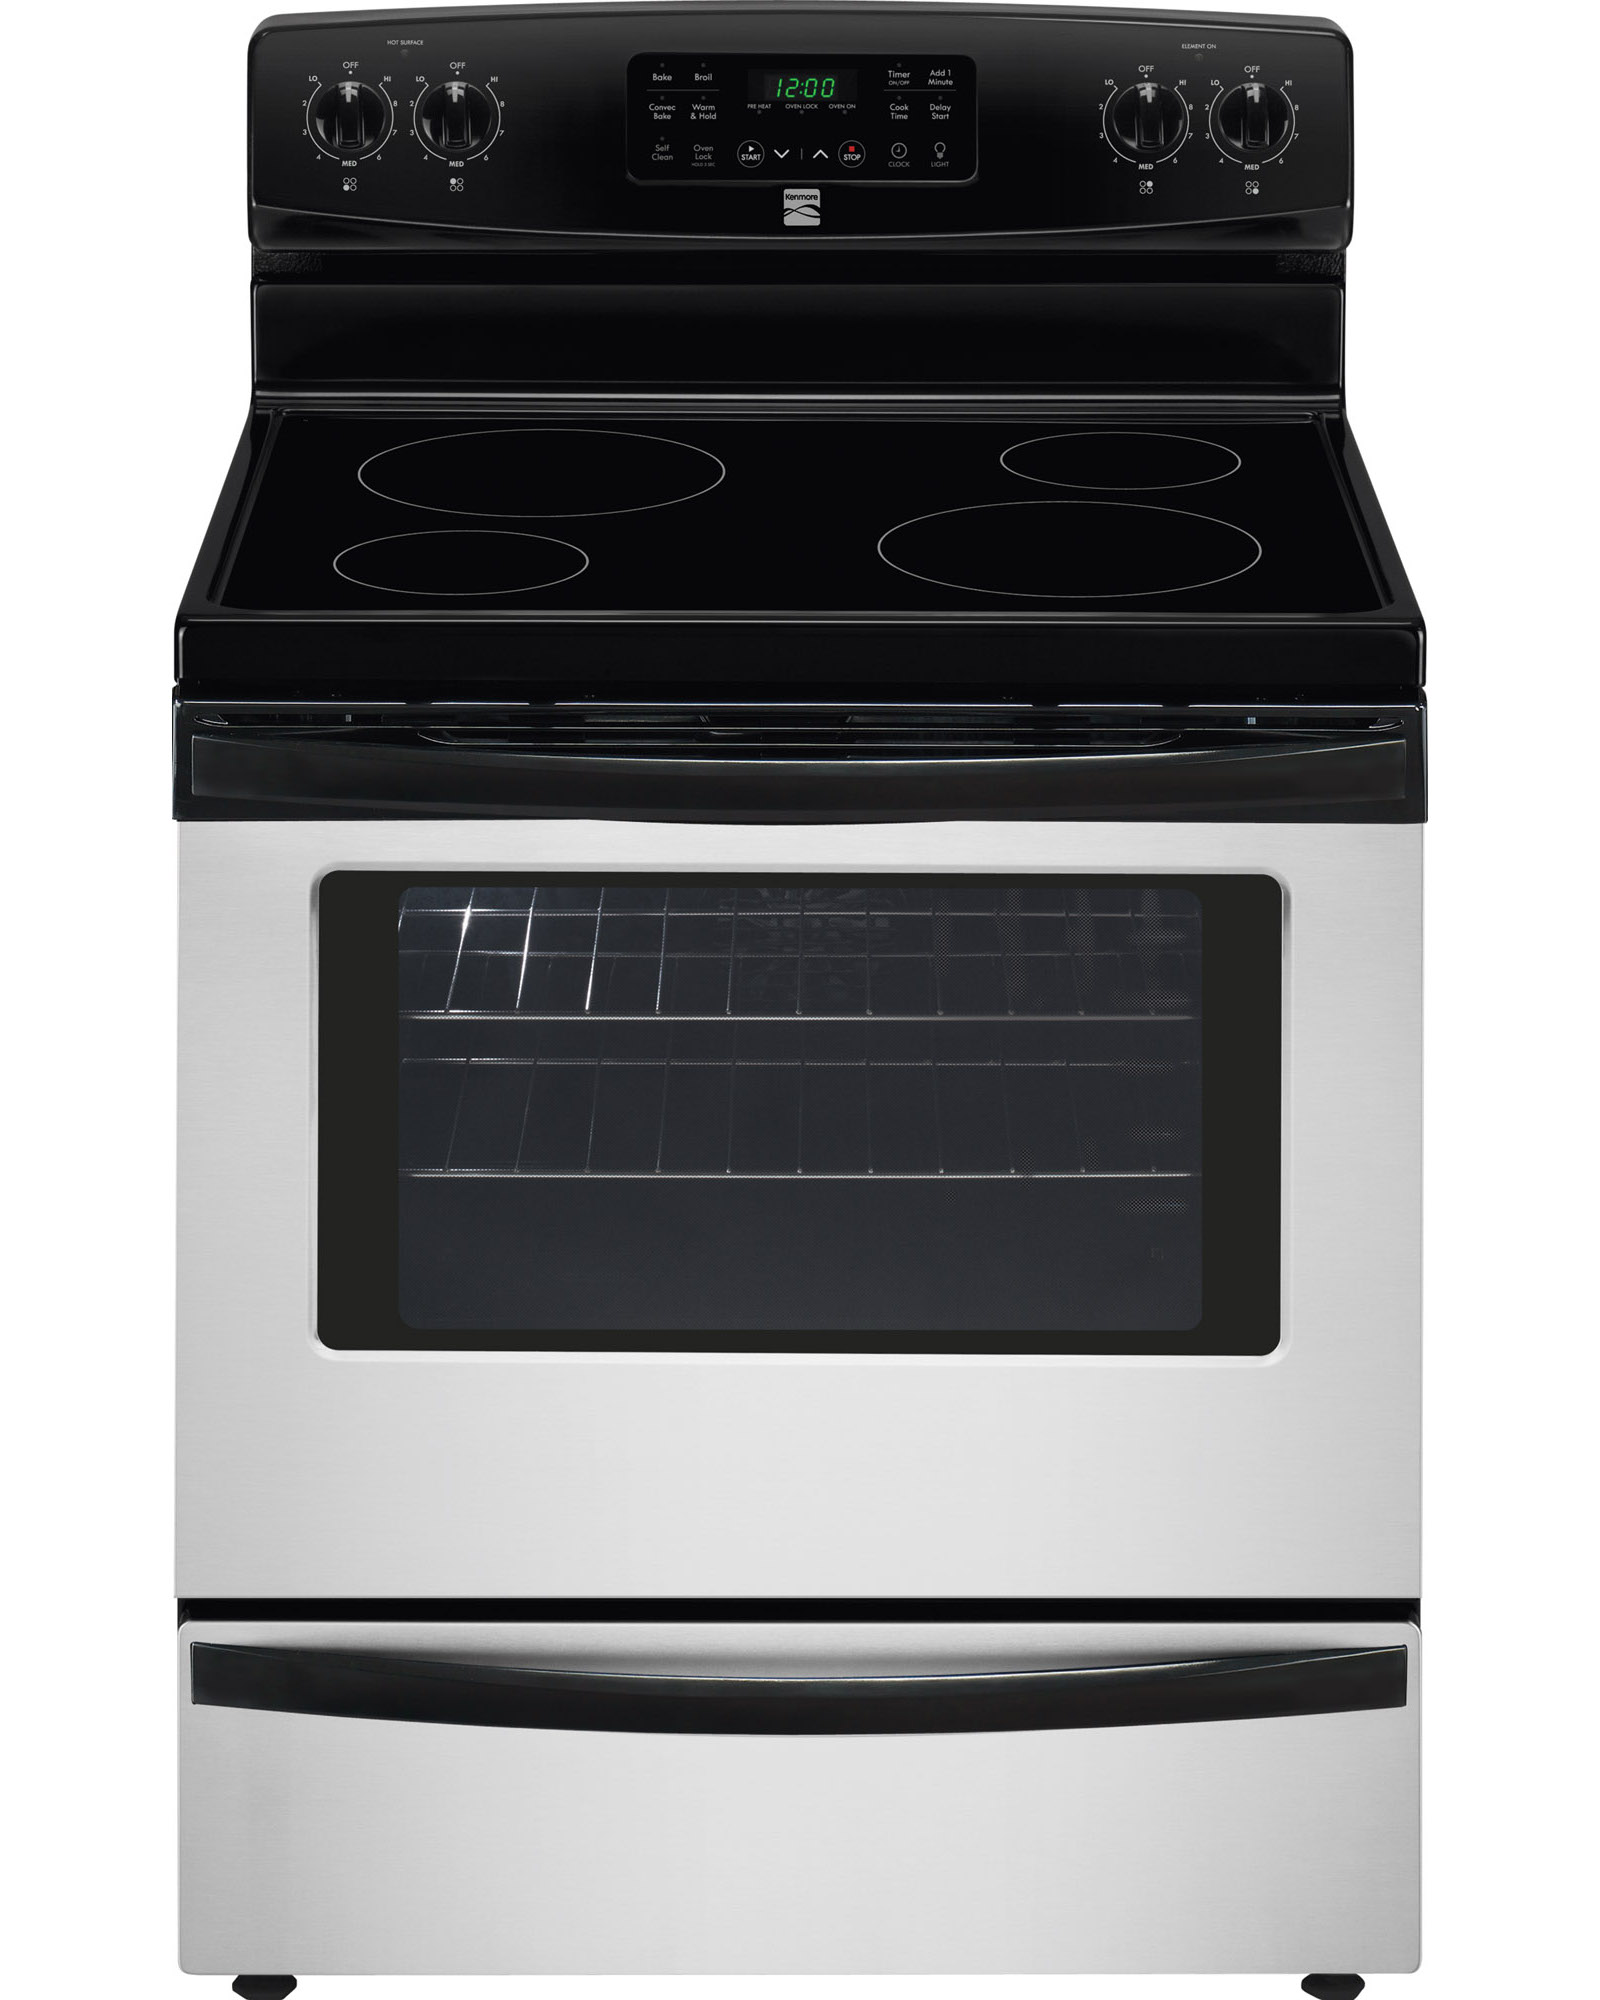 kenmore-5-4-cu-ft-electric-range-save-cooking-time-at-sears